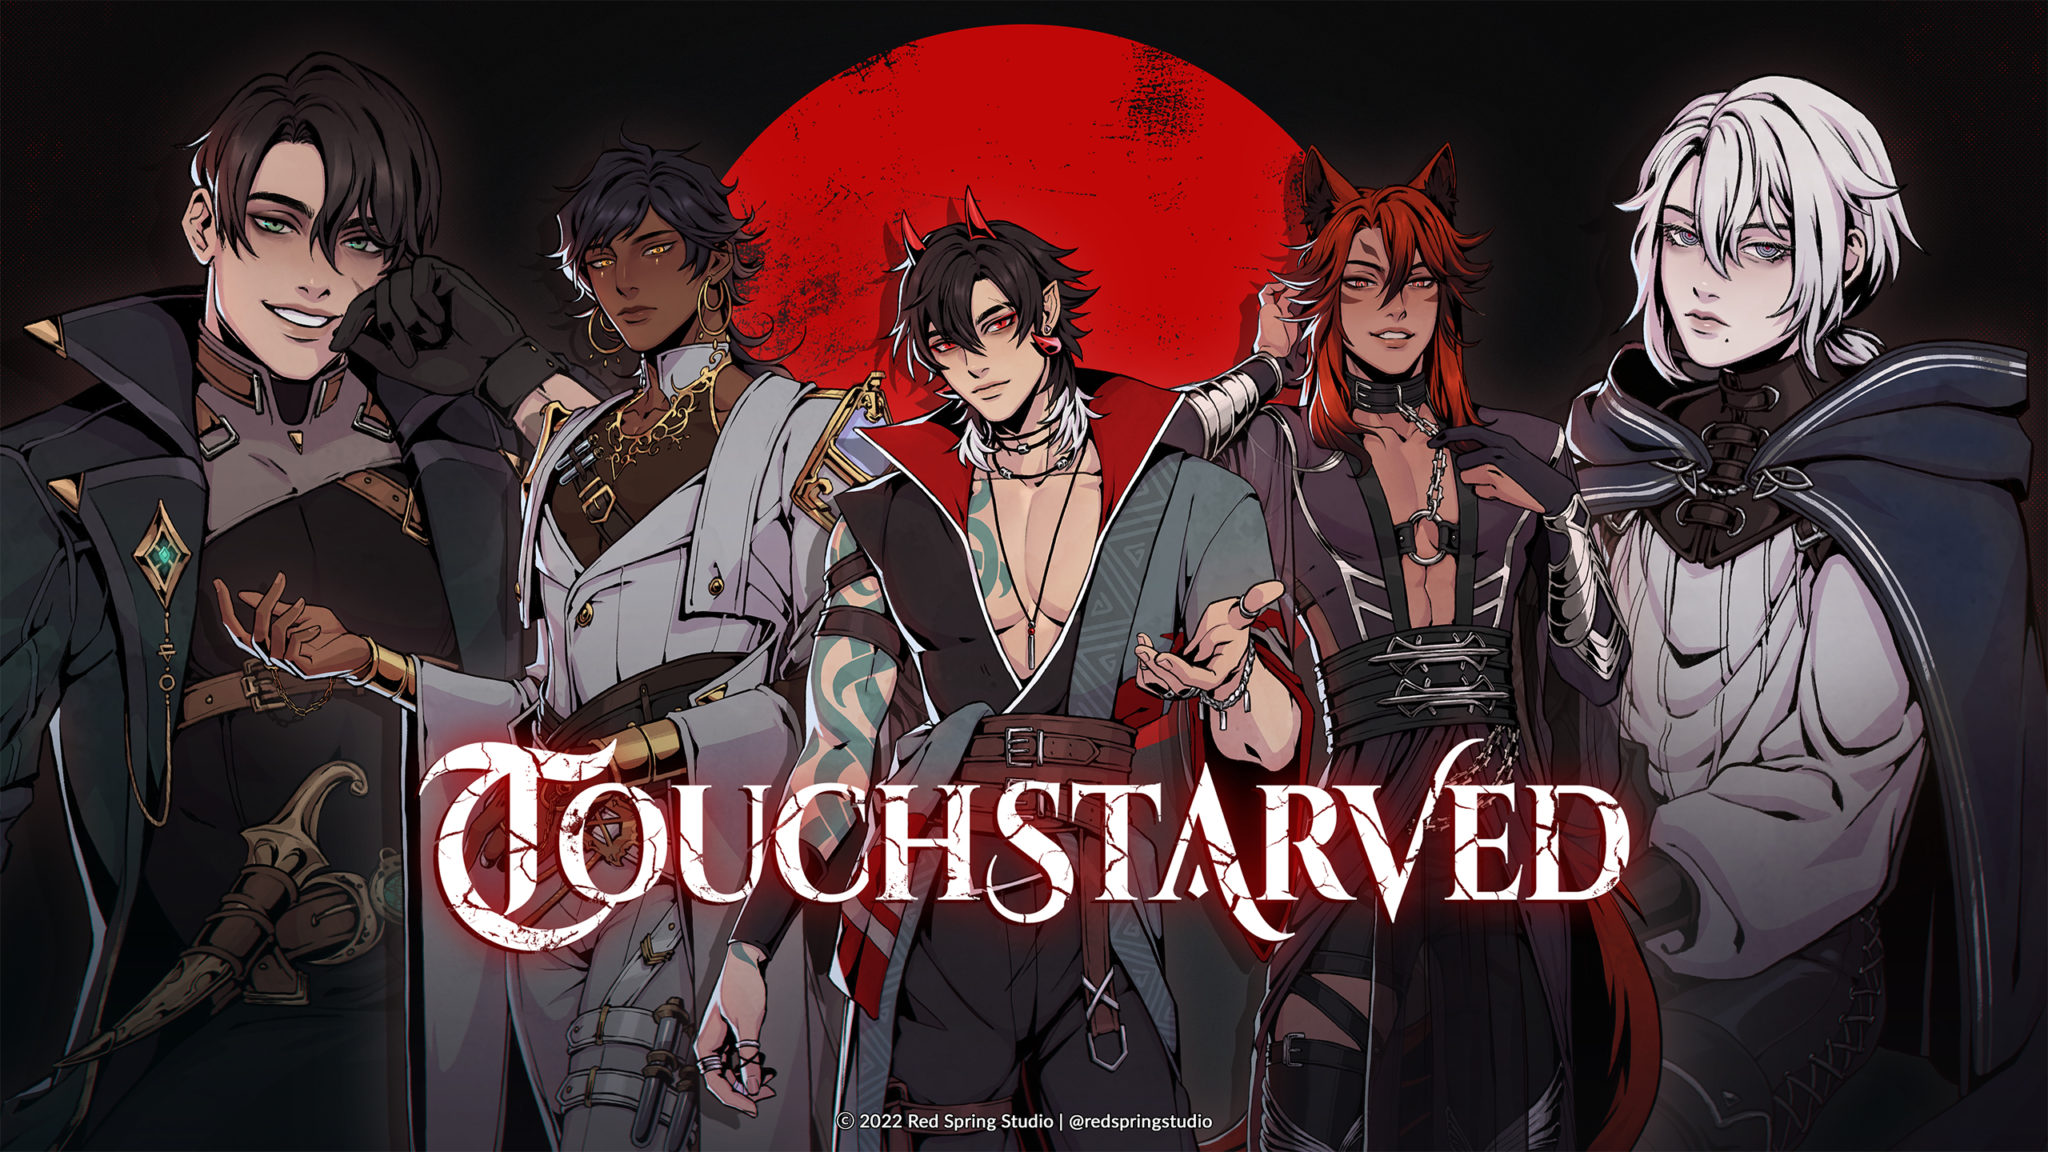 touchstarved love interests